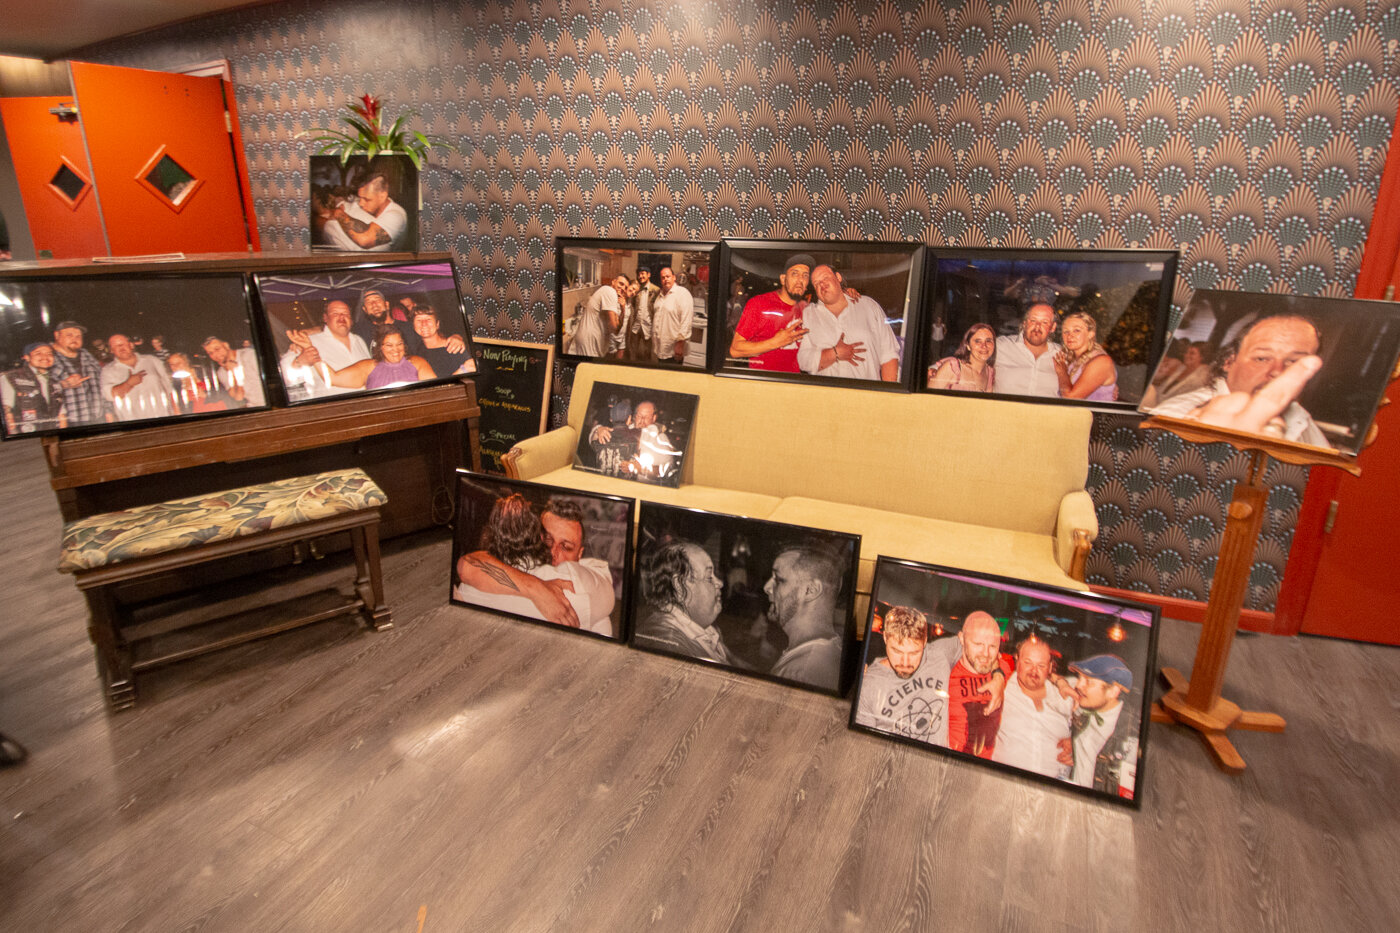 Photos of Justin Ames were on display Saturday night in the foyer of McFiler's Chehalis Theater during a benefit held for his daughters following Ames's death last month.